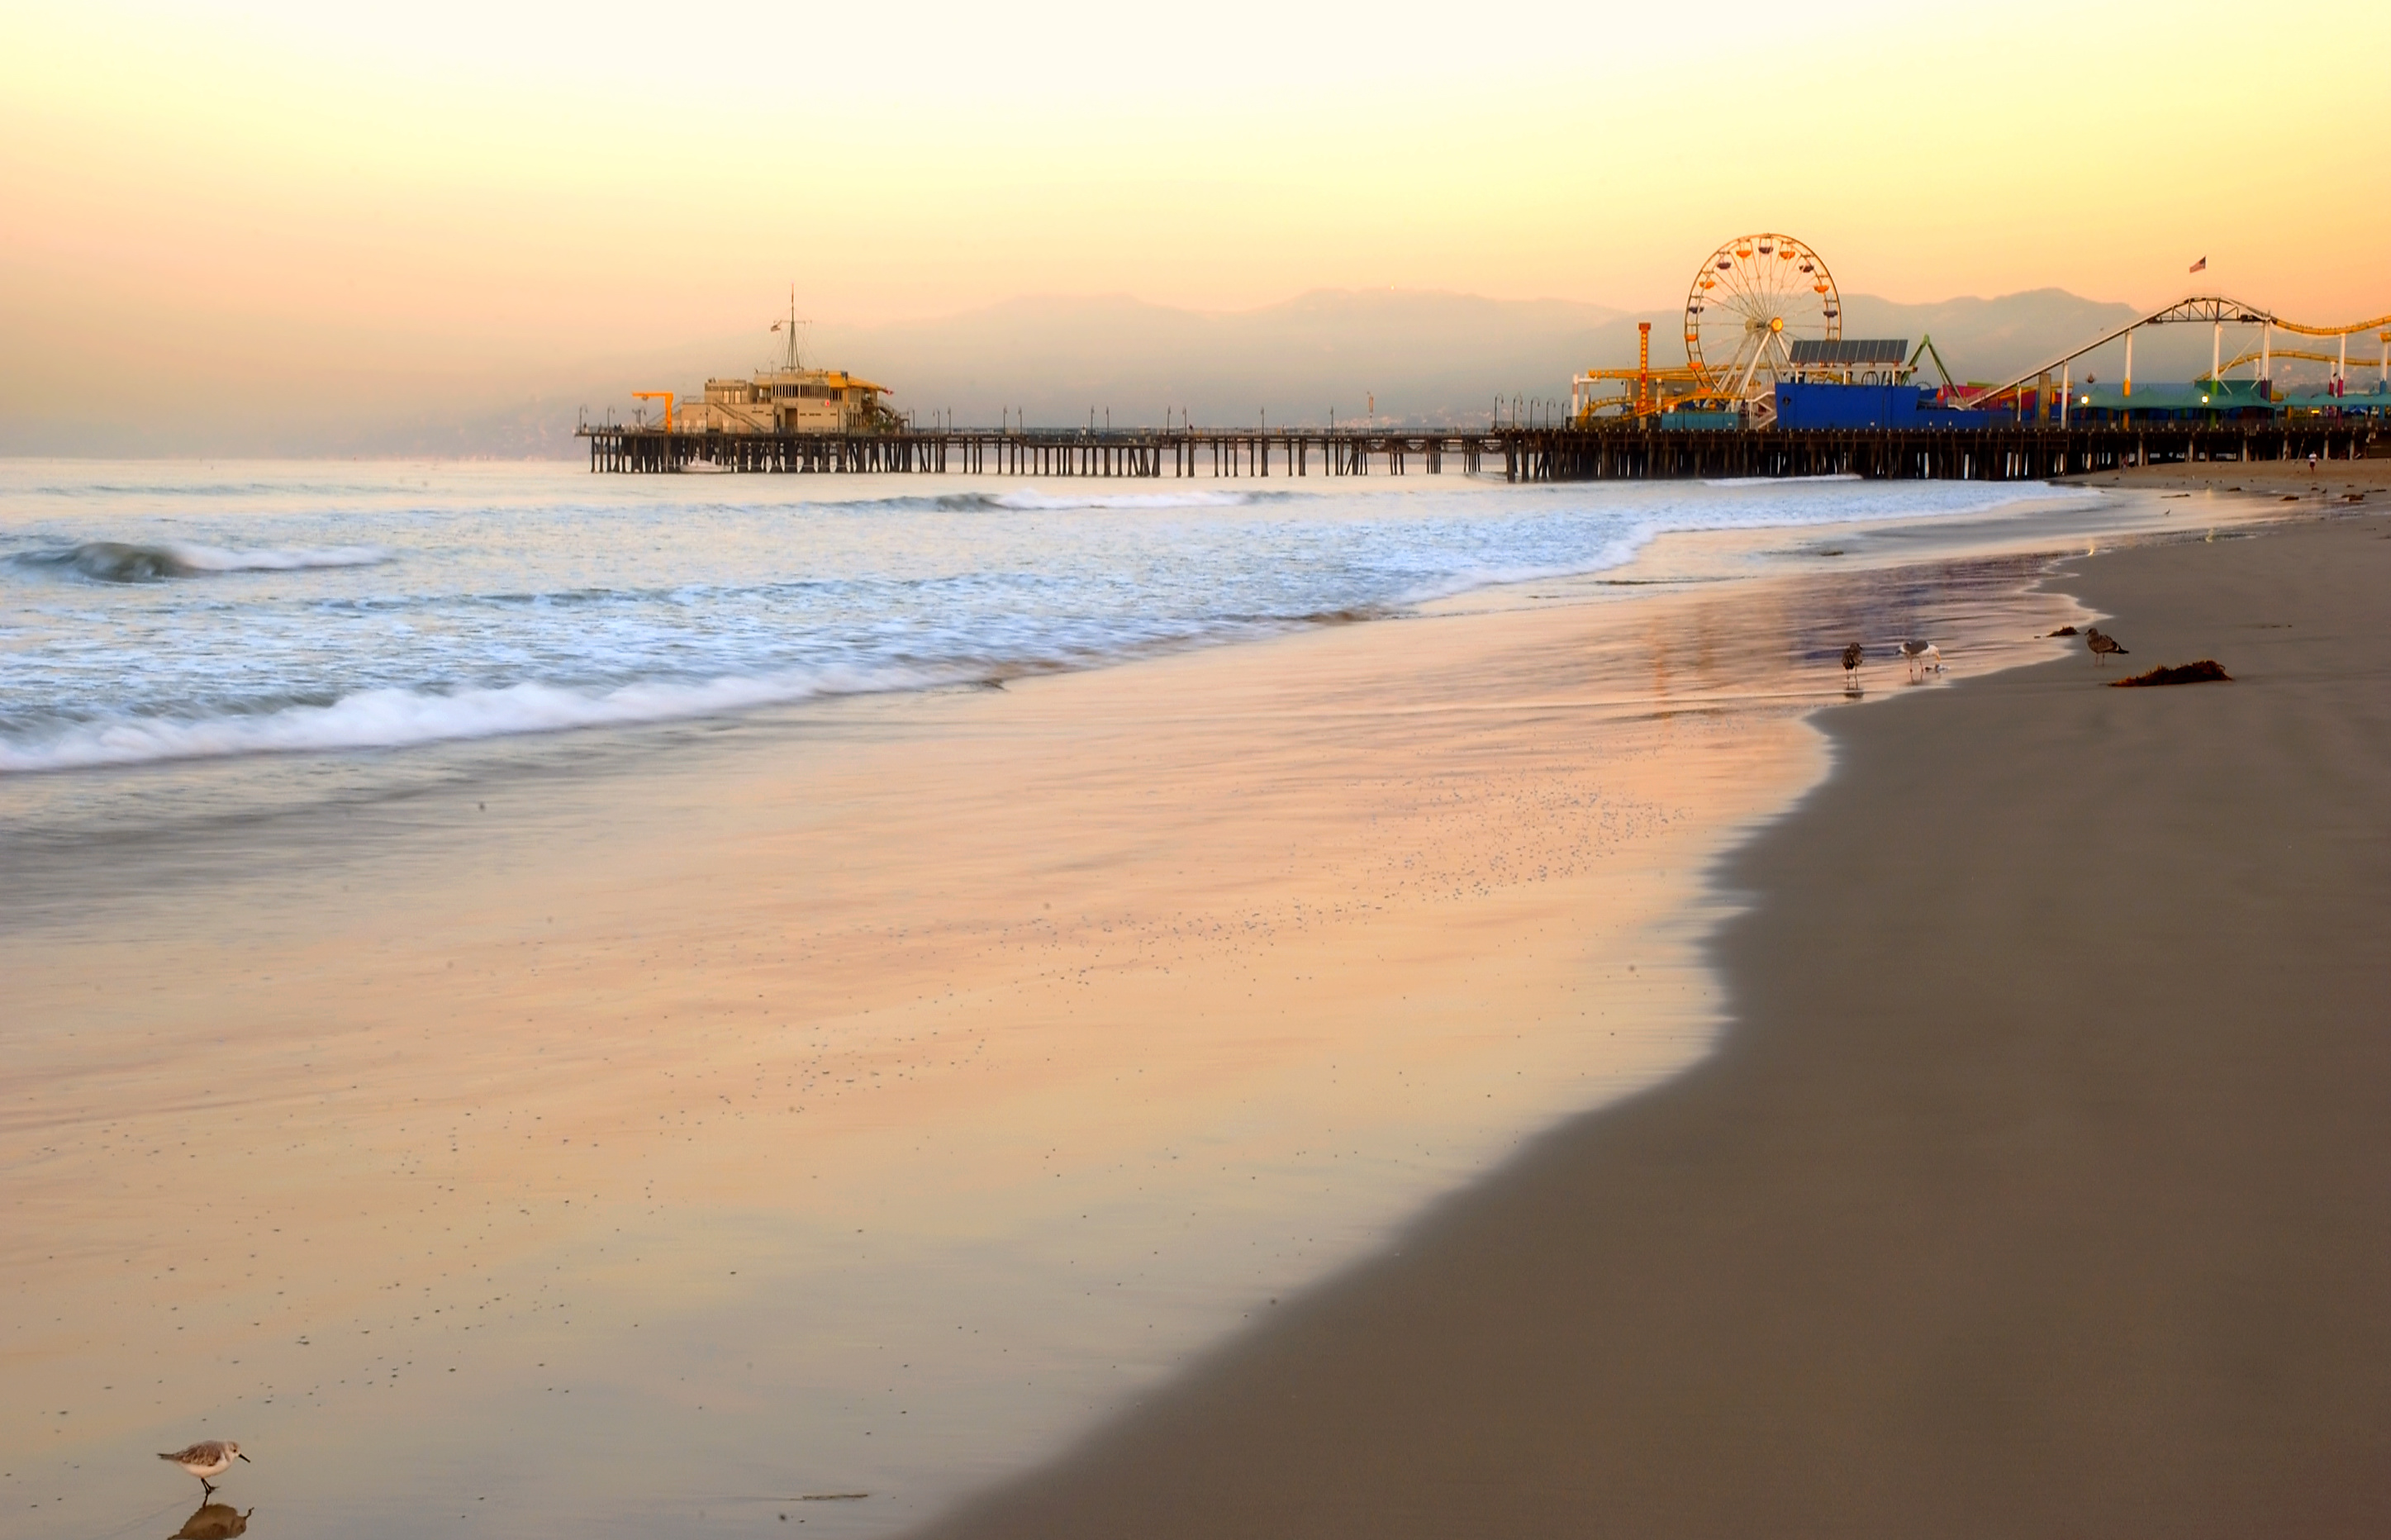 What to do in Santa Monica